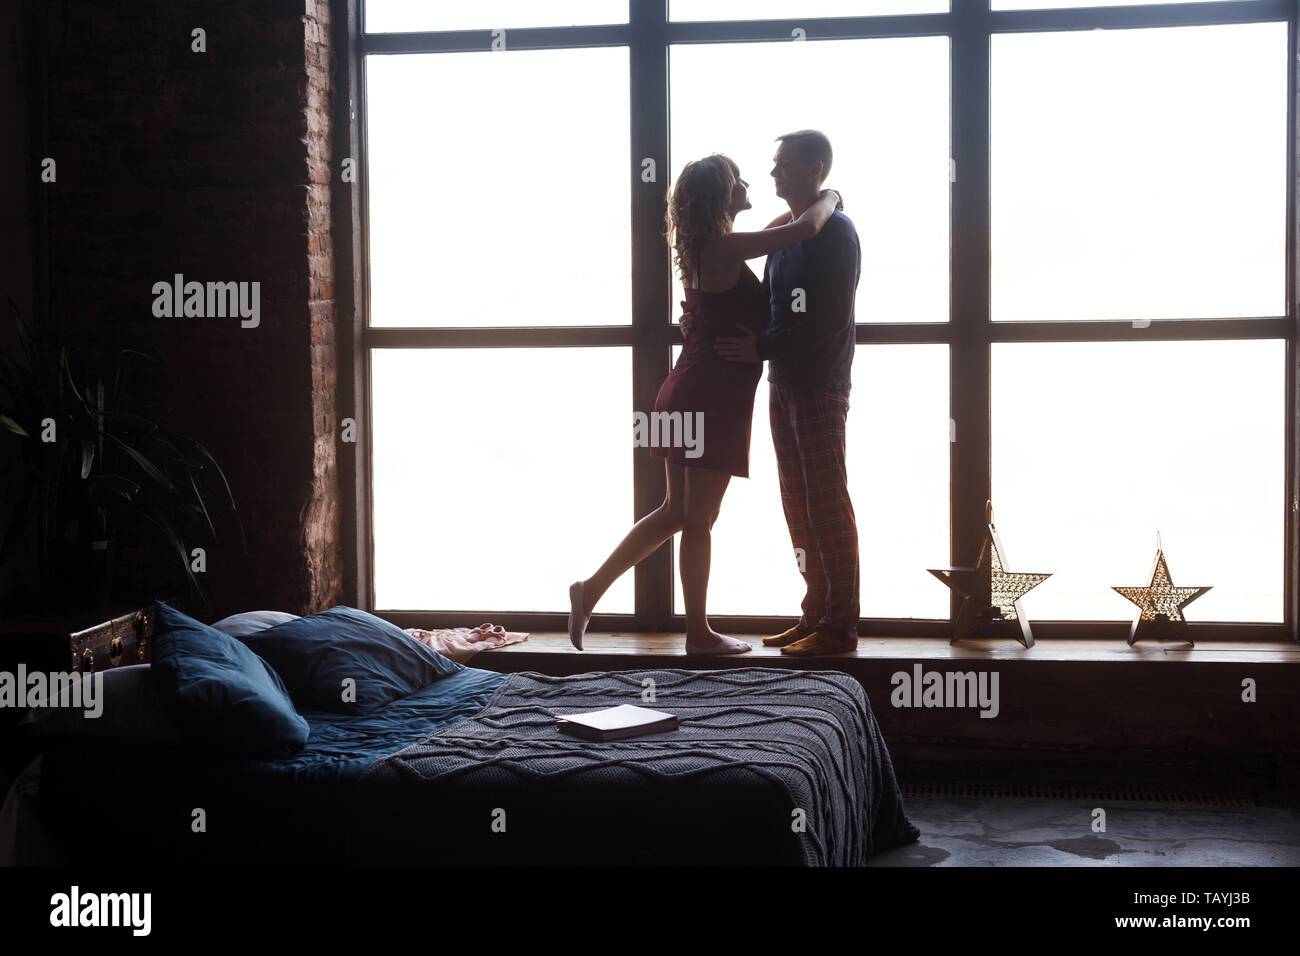 Silhouette of young happy beautiful couple expecting baby standing together in the big window sill hugging and looking to each other with love. Studio Stock Photo